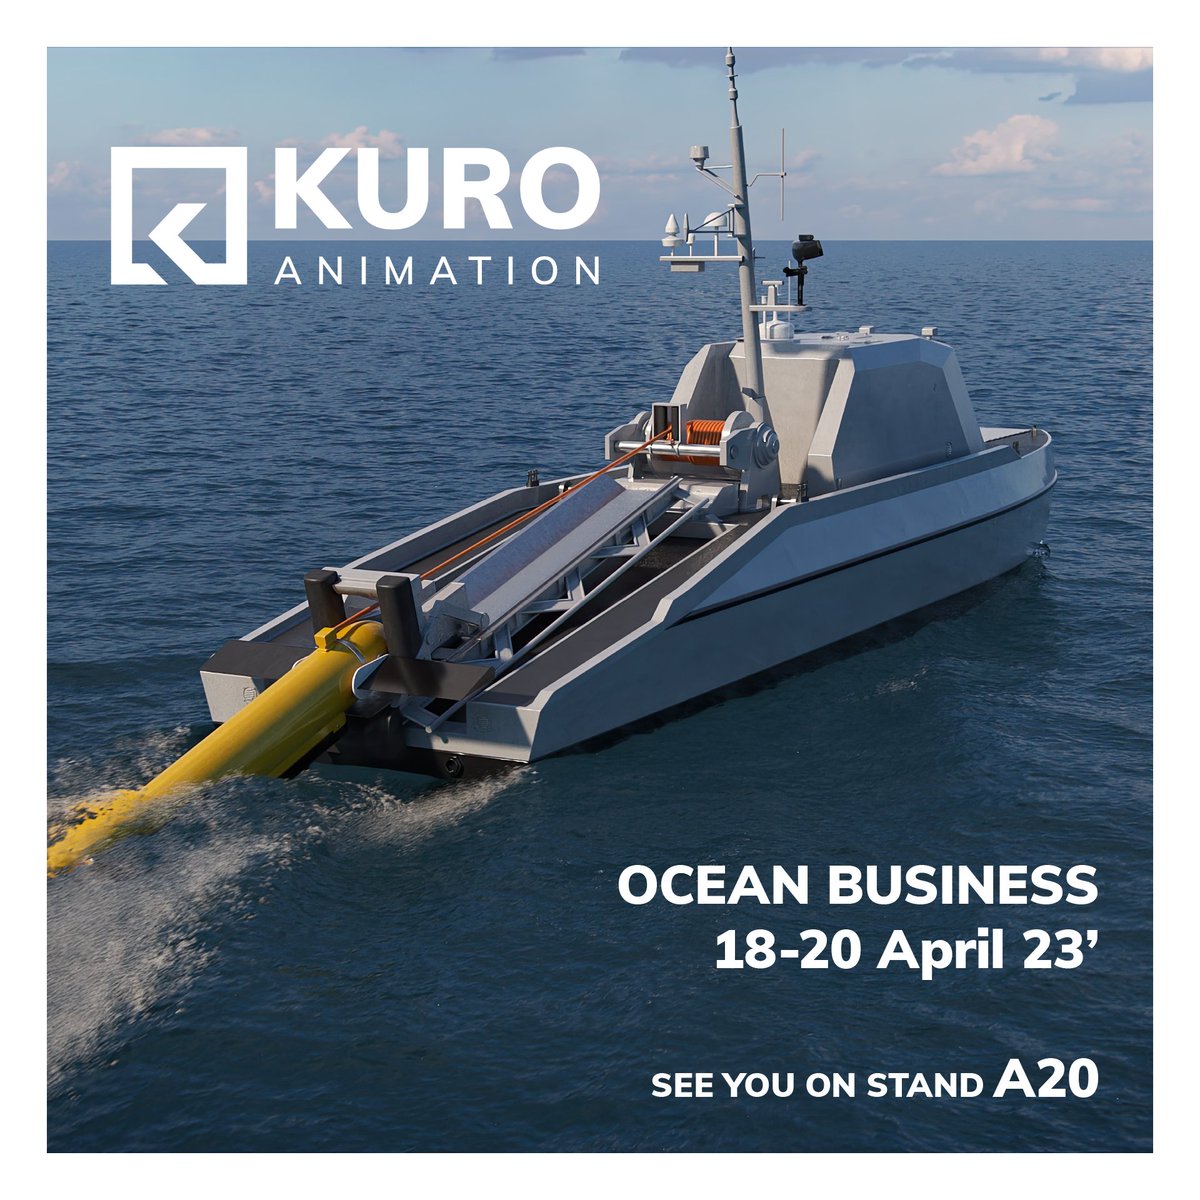 Next week some of our team will be in Southampton for the @OceanBusiness expo. We're excited to showcase examples of our subsea animations on stand A20 so please come by and say hello. #ob23 #oceanbuzz #oceantech #oceanbiz